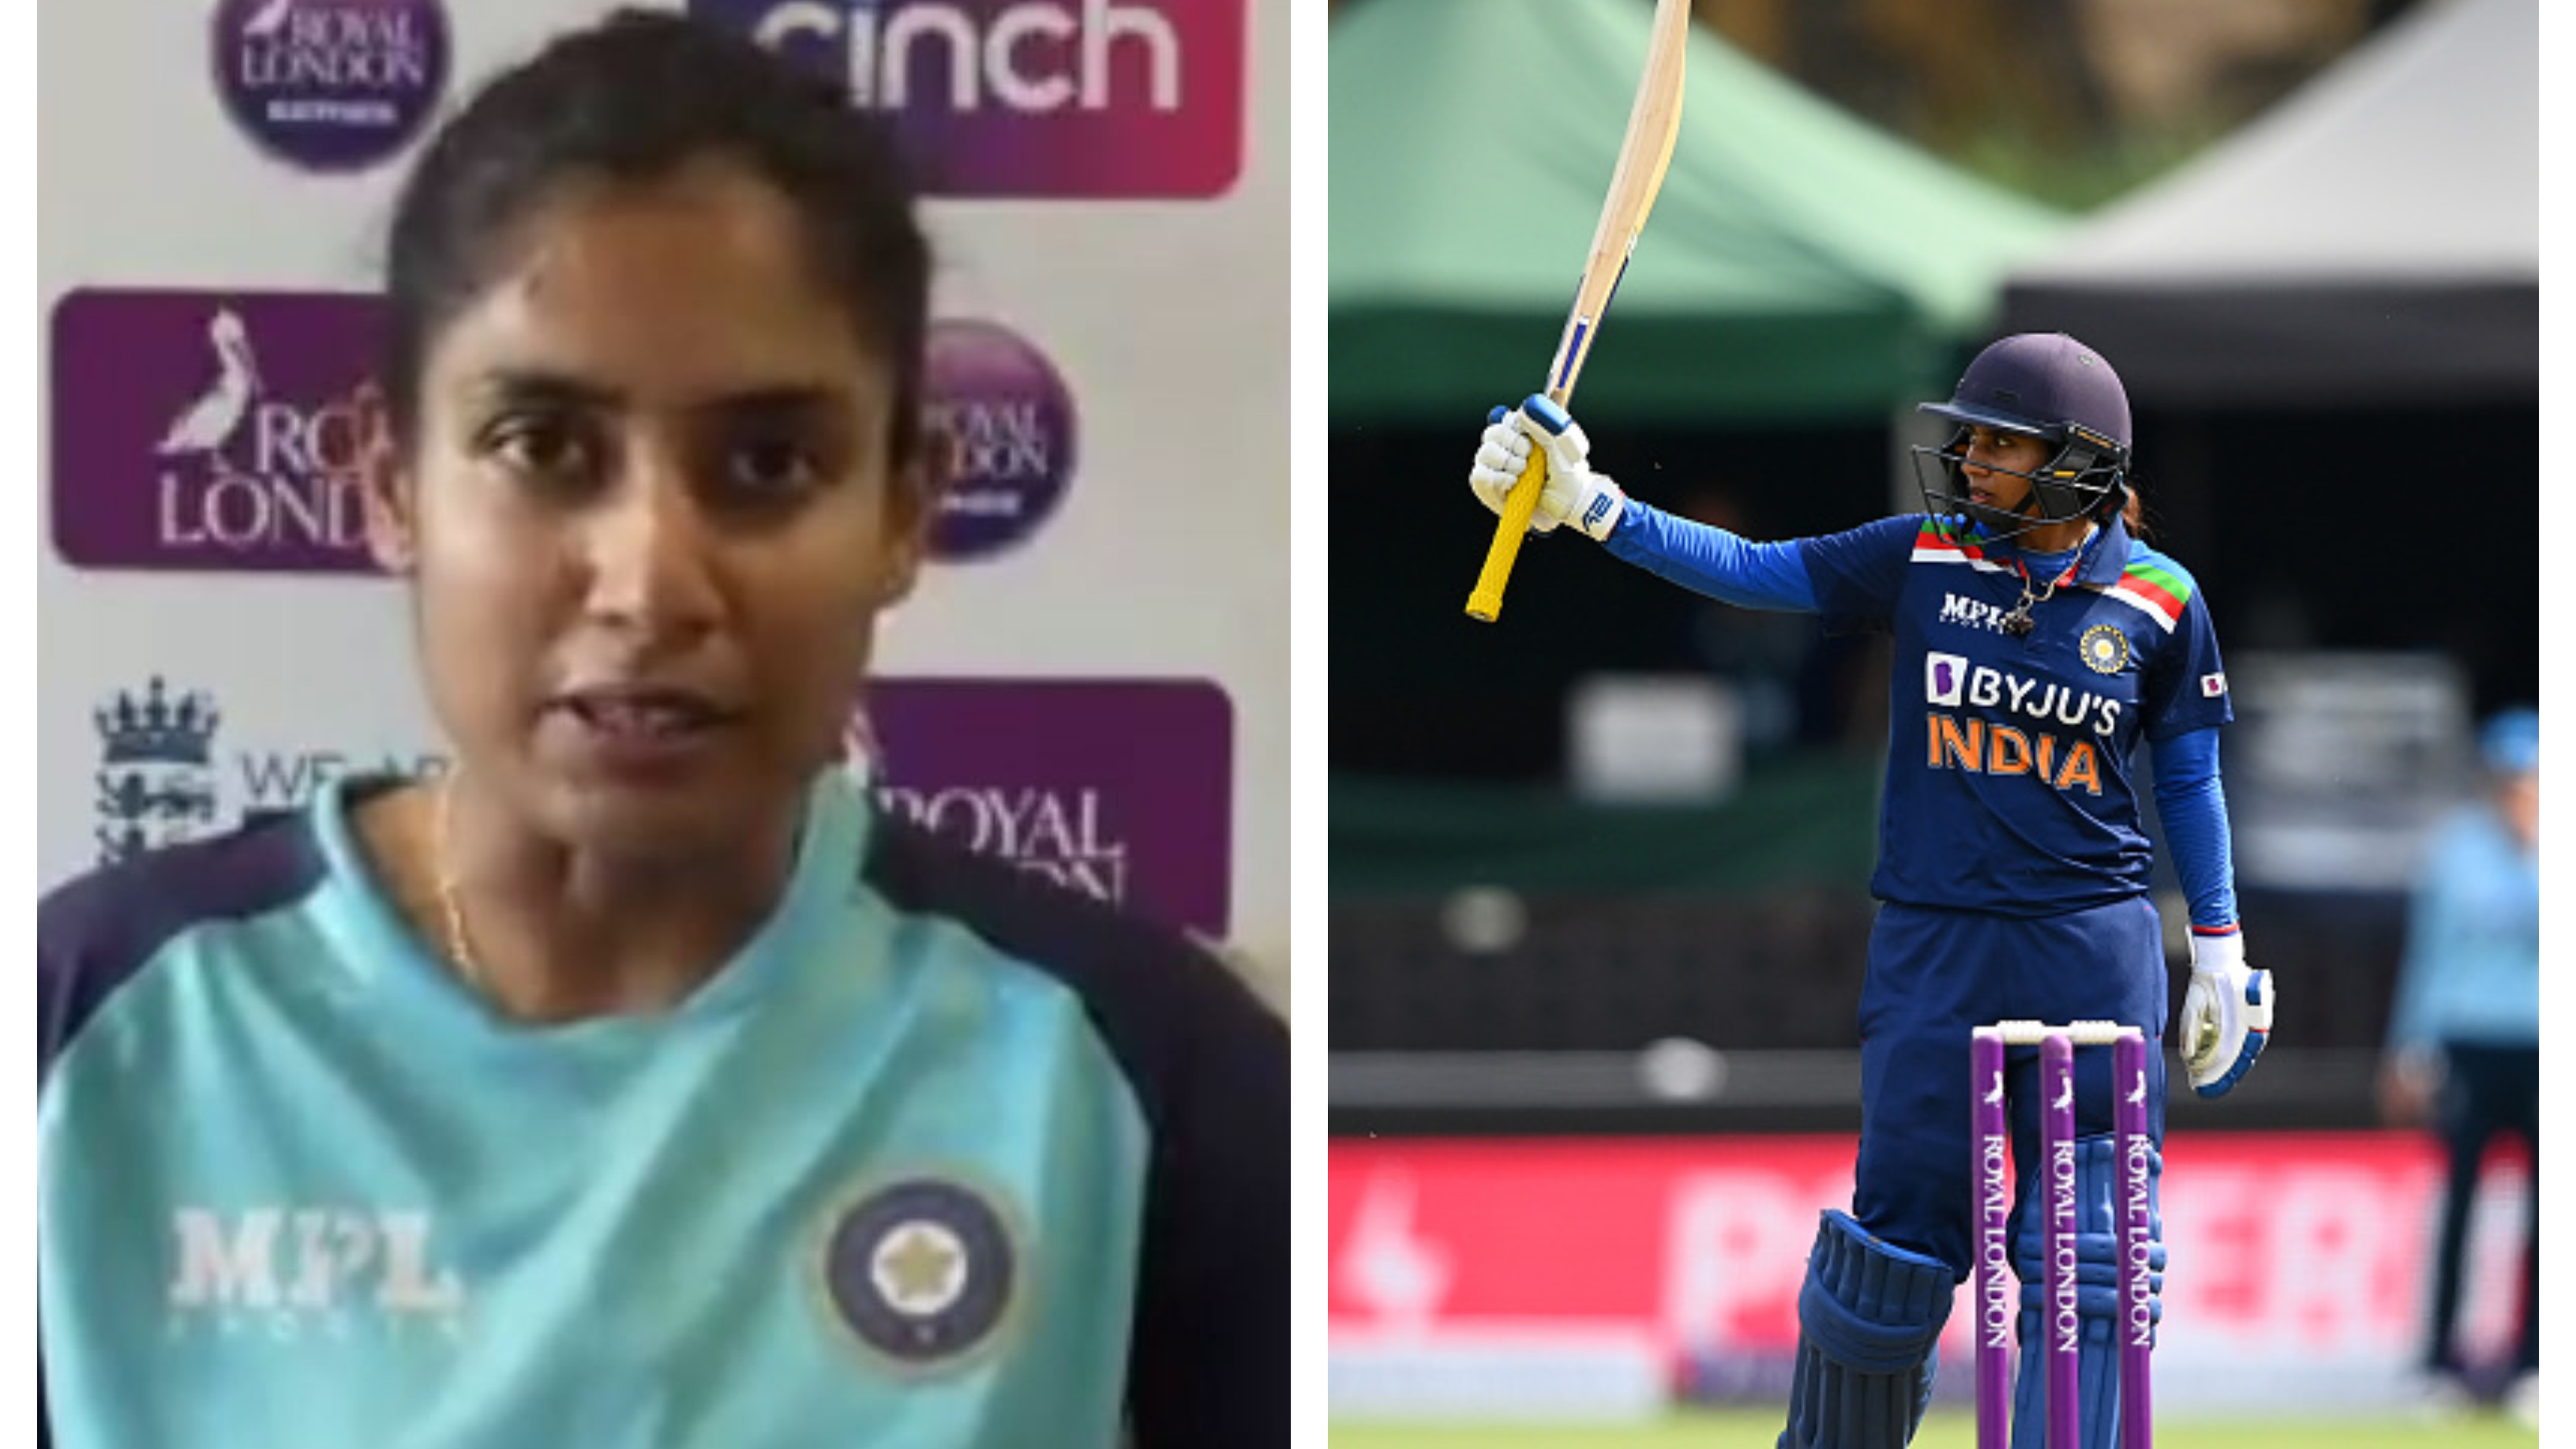 ENGW v INDW 2021: I would like to add certain dimensions to my batting- Mithali Raj ahead of World Cup 2022